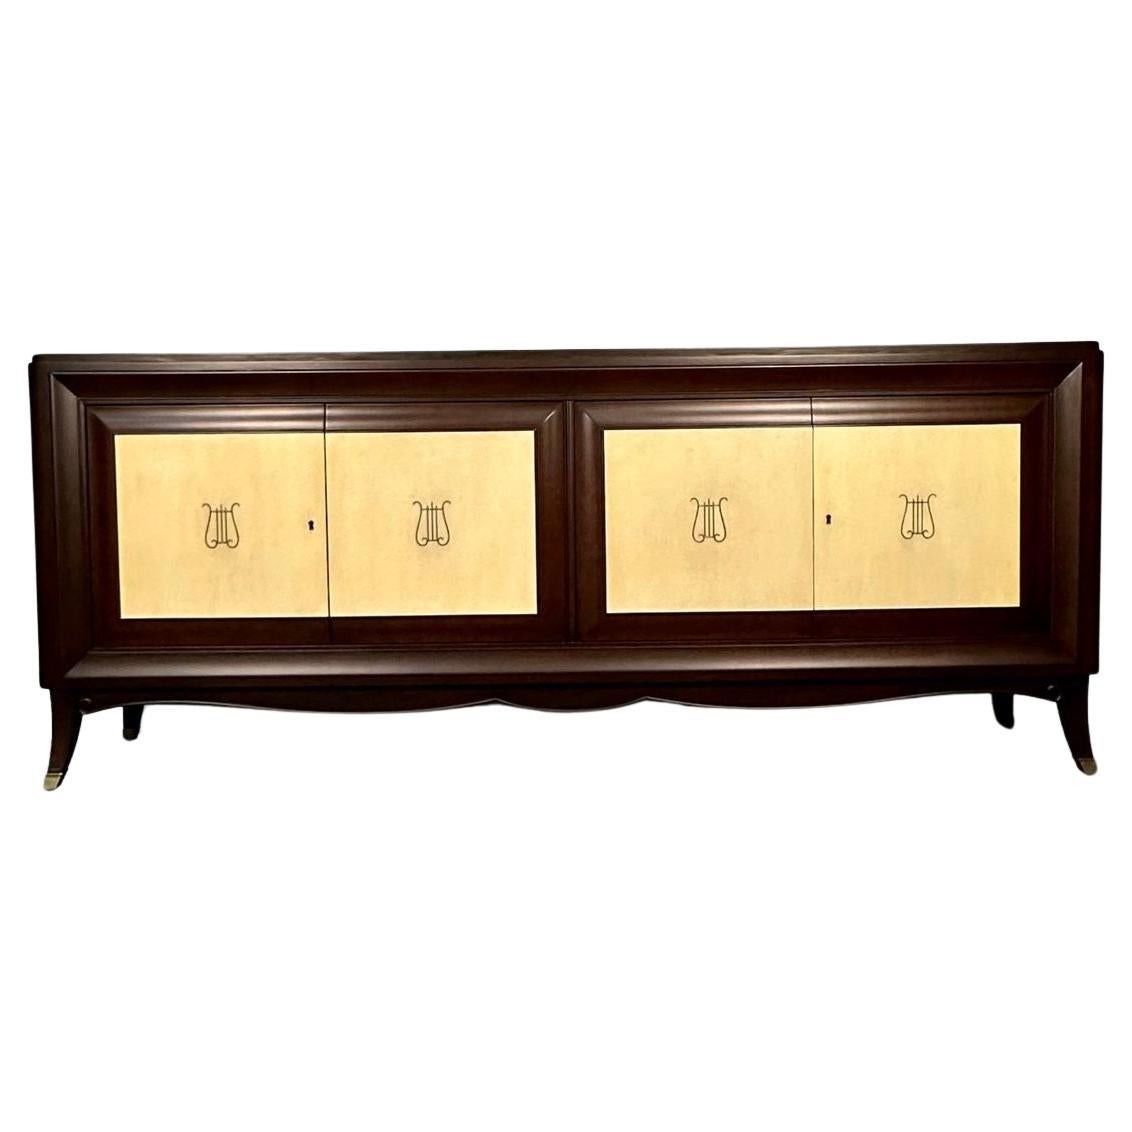 Italian Midcentury Sideboard / Credenza / Cabinet, Parchment, Mahogany, 1950s For Sale